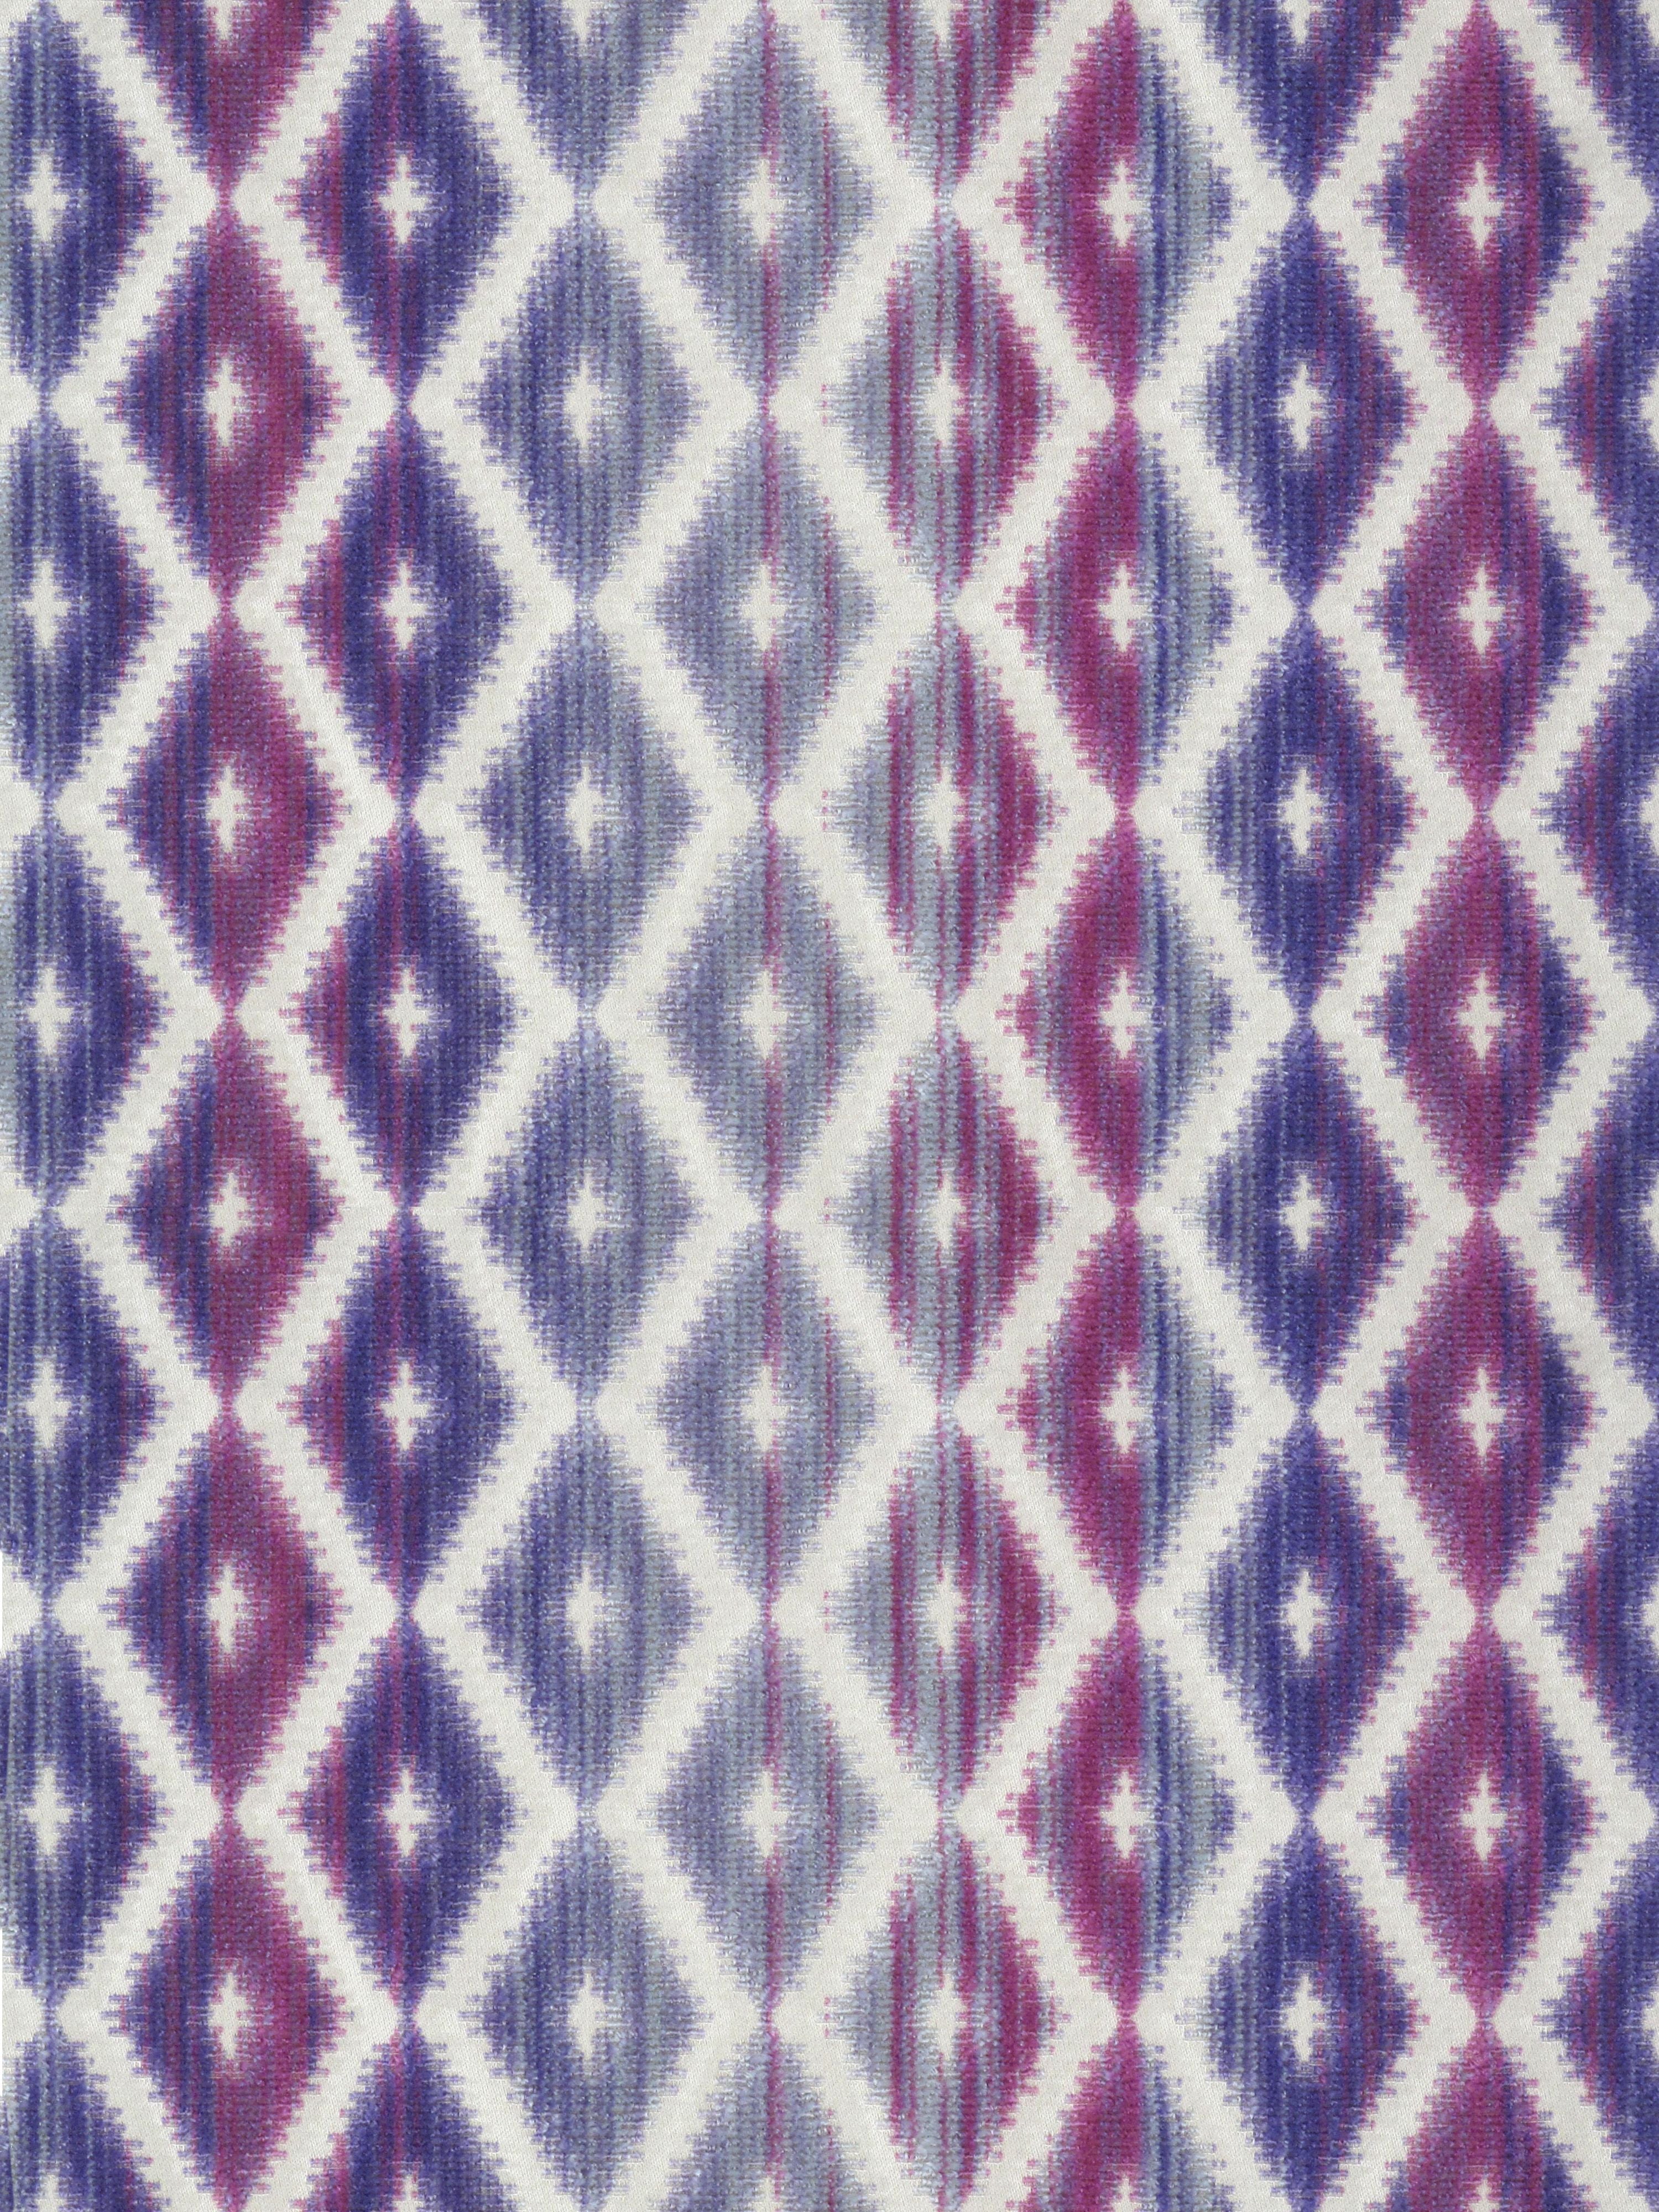 Diamantina fabric in lilac color - pattern number SI 00111316 - by Scalamandre in the Old World Weavers collection